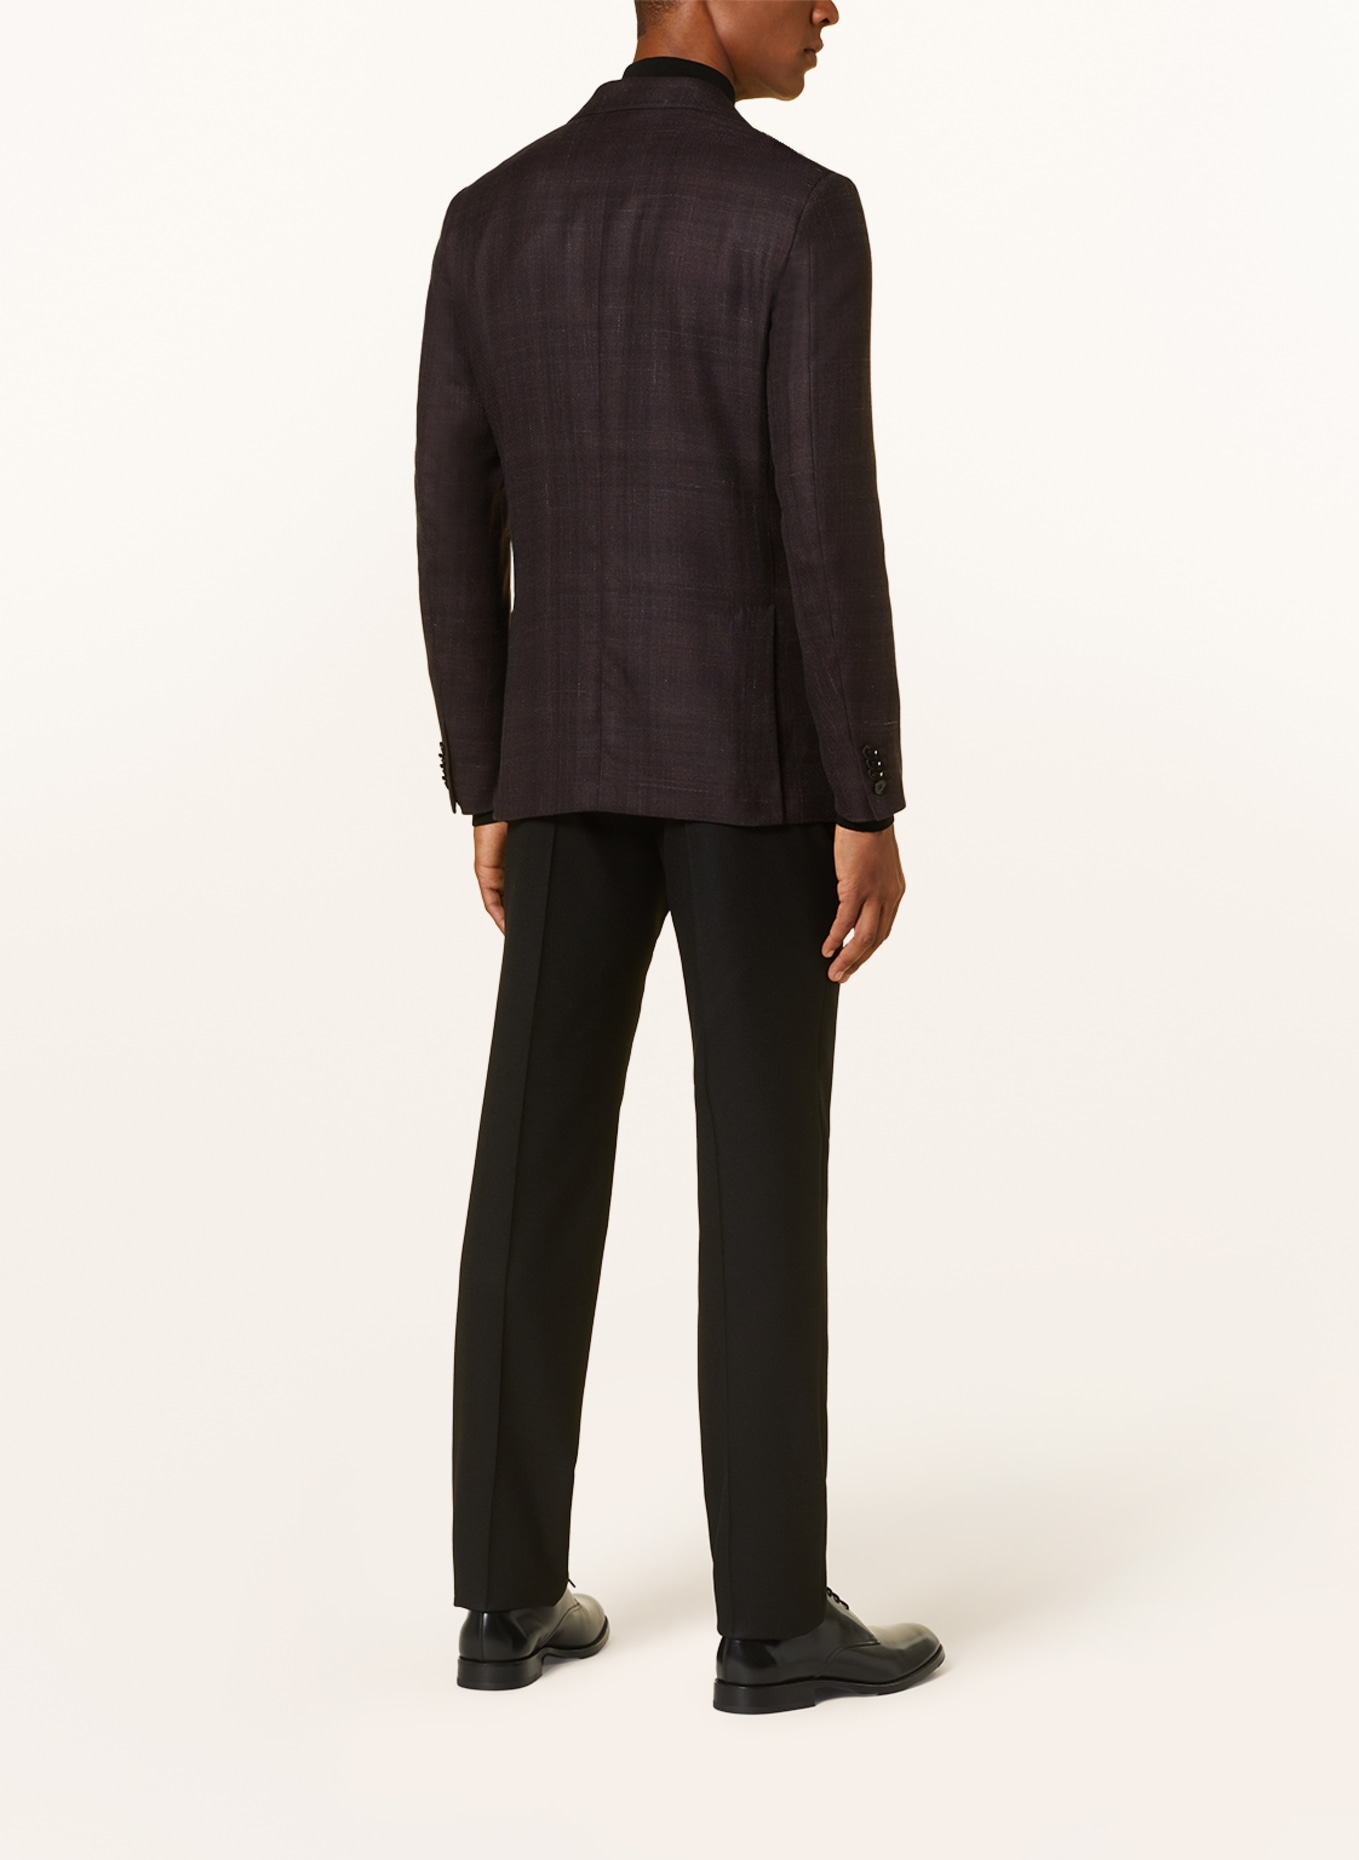 ZEGNA Tailored jacket extra slim fit with cashmere, Color: DARK RED (Image 3)